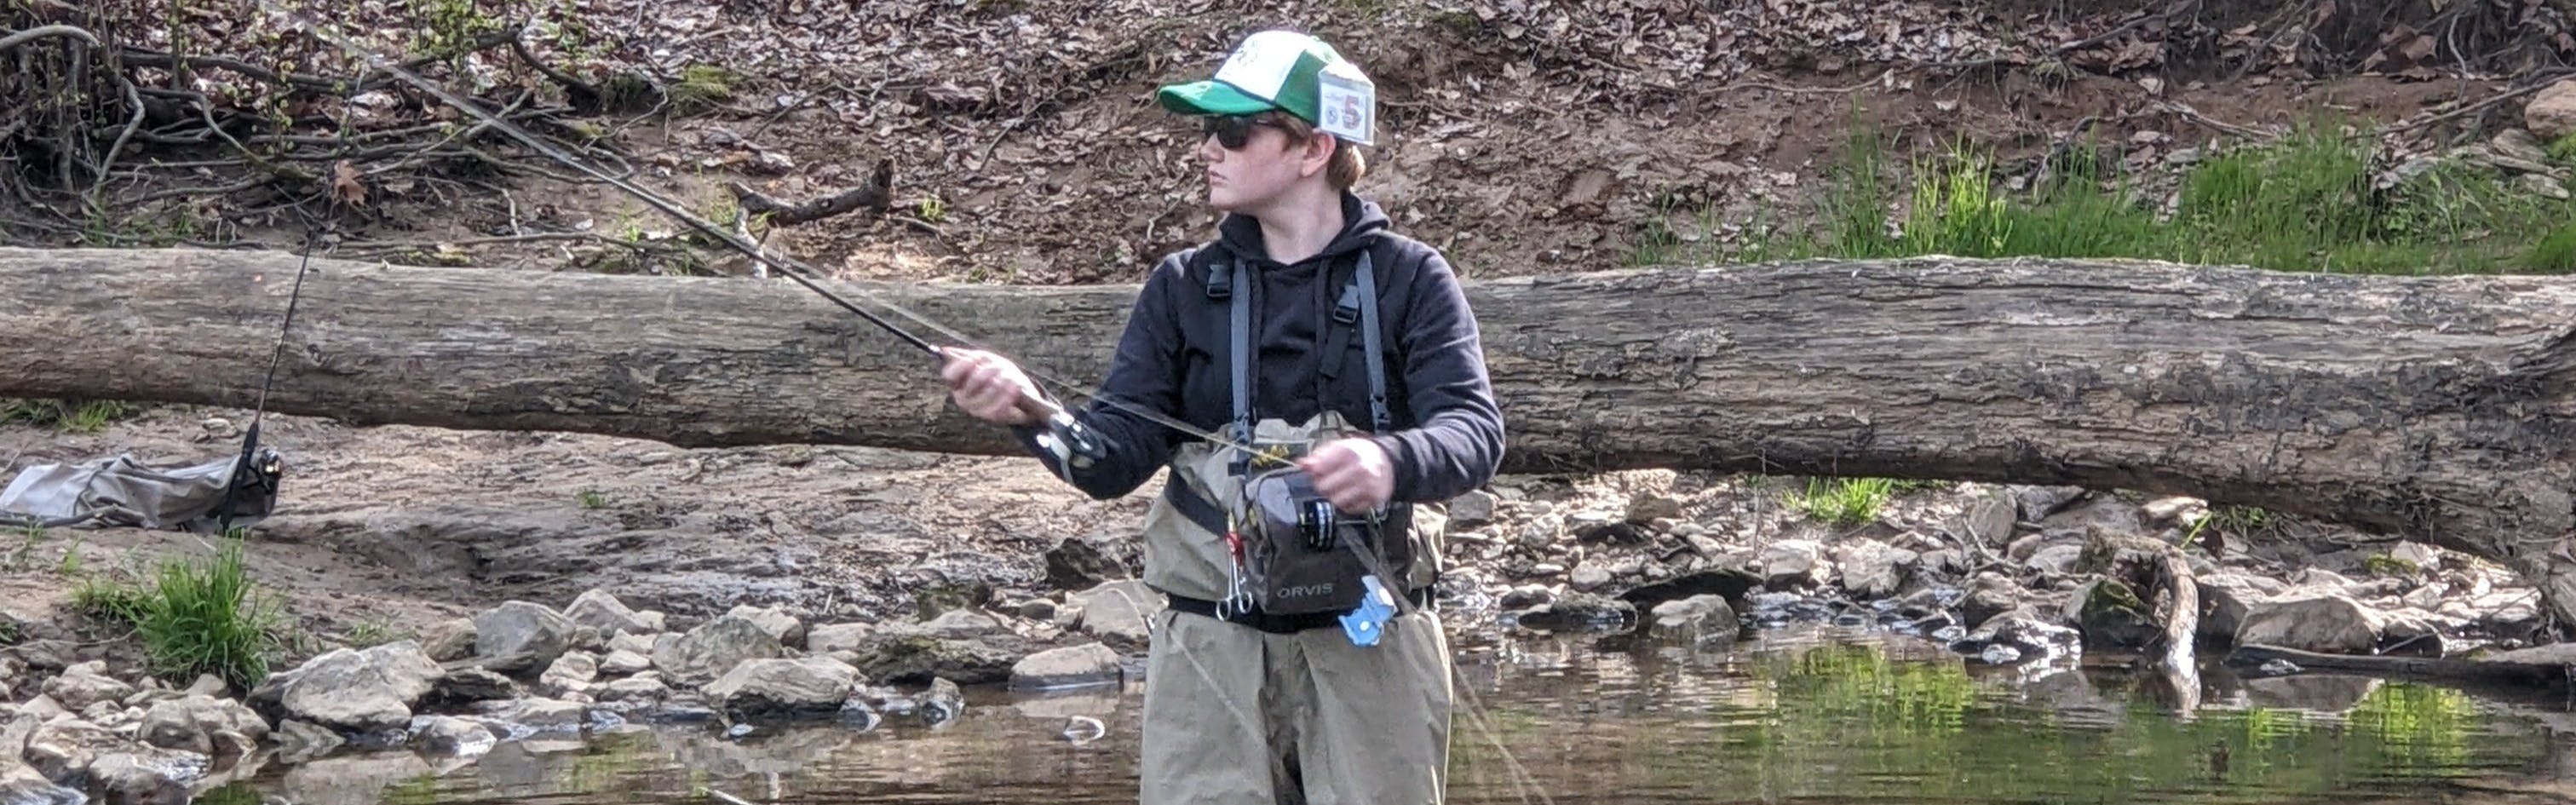 How to Go Fly Fishing with Your Kids | Curated.com